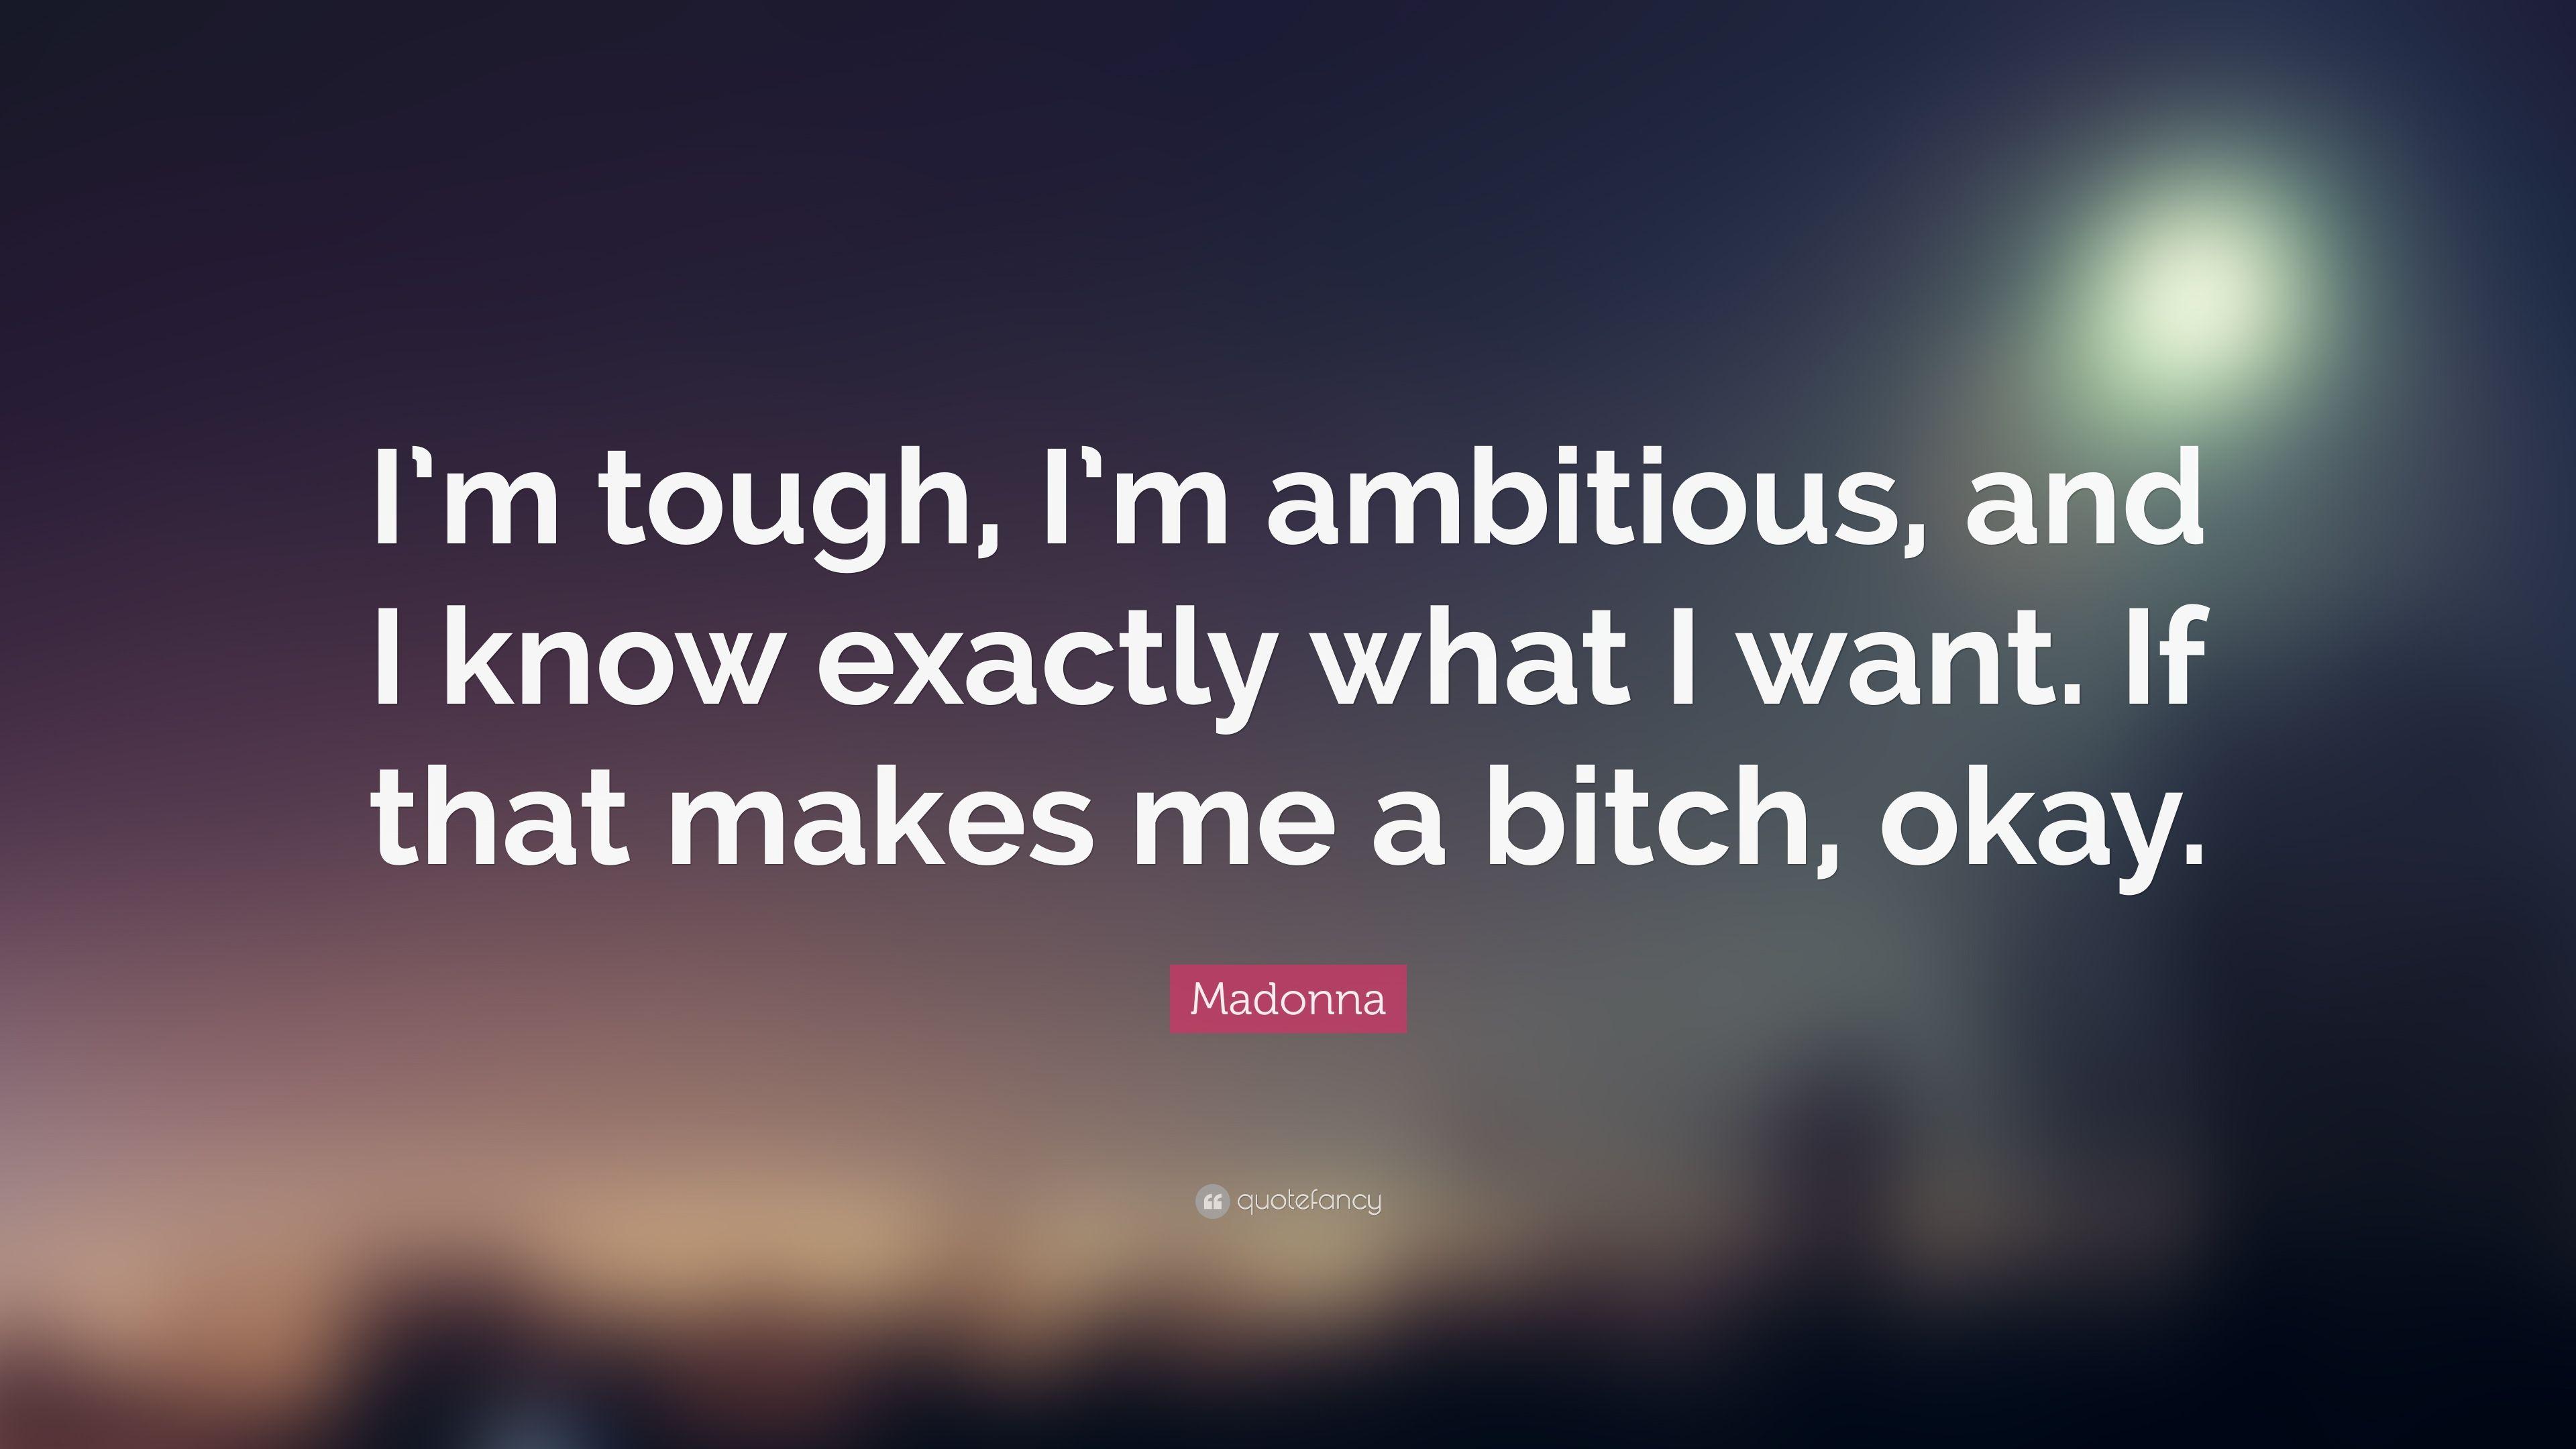 Madonna Quote: “I'm tough, I'm ambitious, and I know exactly what I